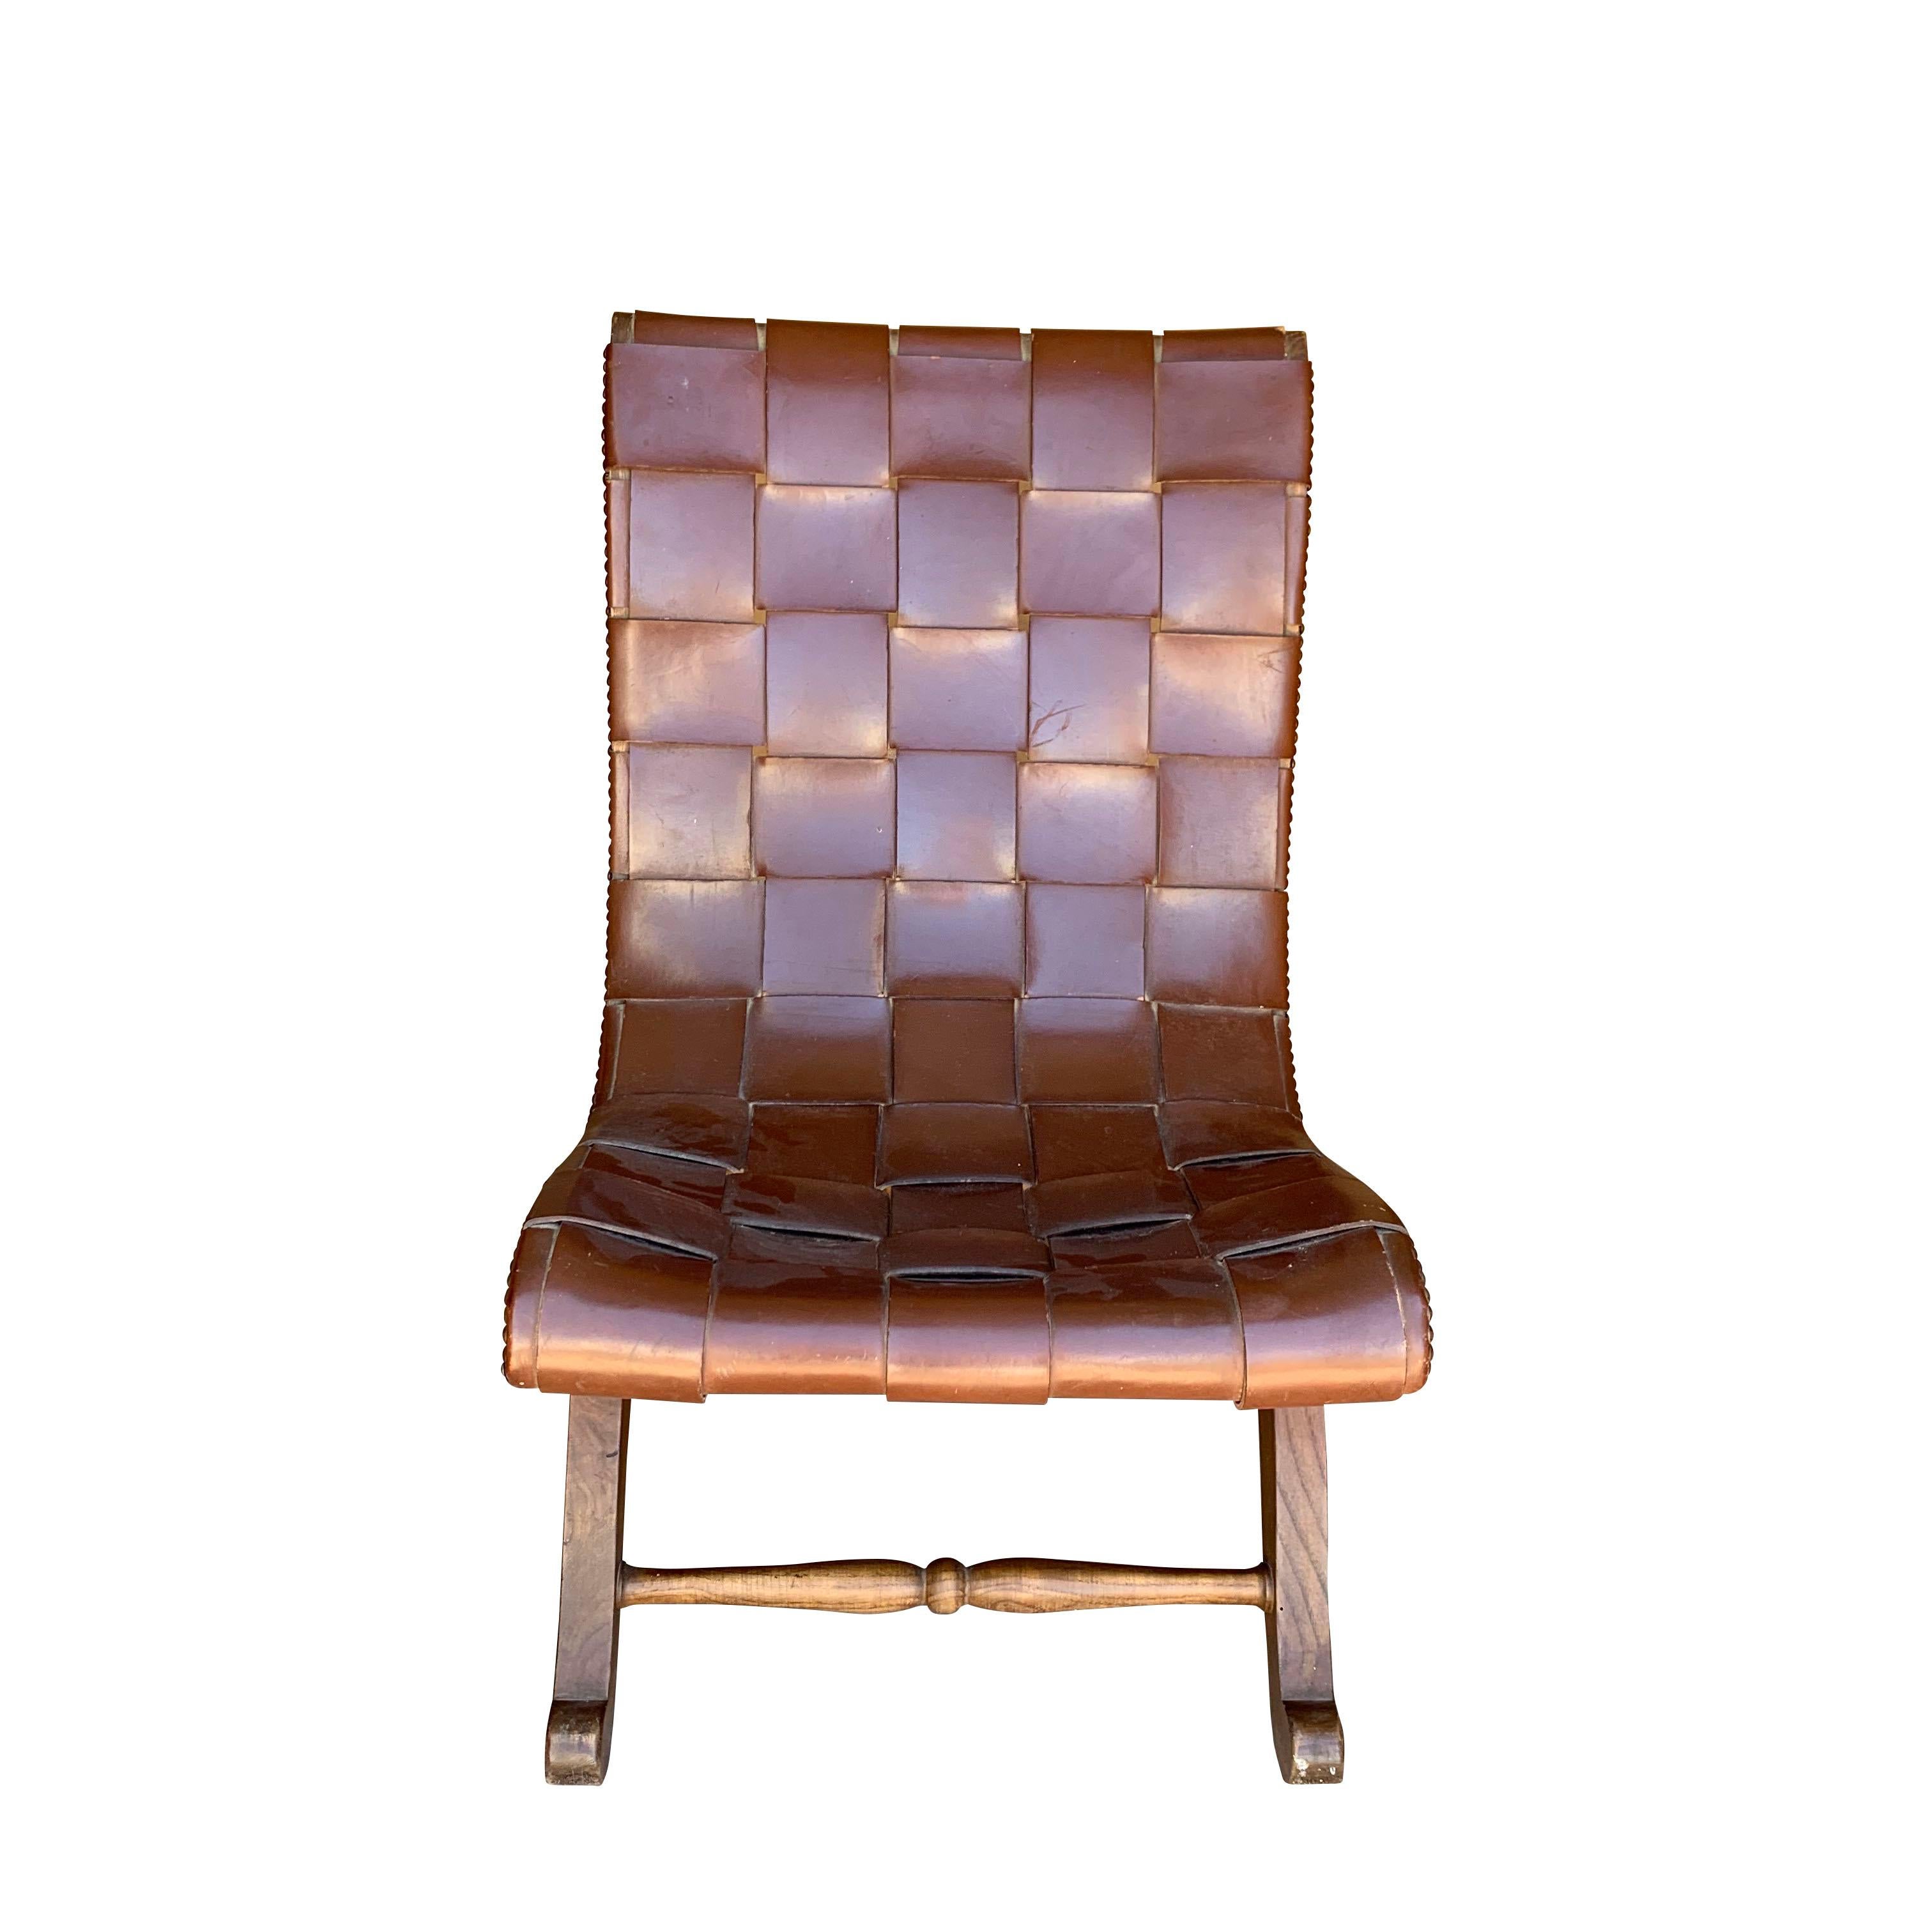 Spanish designer Valenti brown woven leather side chair with a trademark designed wood base.
Seen from the side are sculptural clean lines and curved legs with the nailhead trim following the lines of the chair.
The woven leather is seamless,